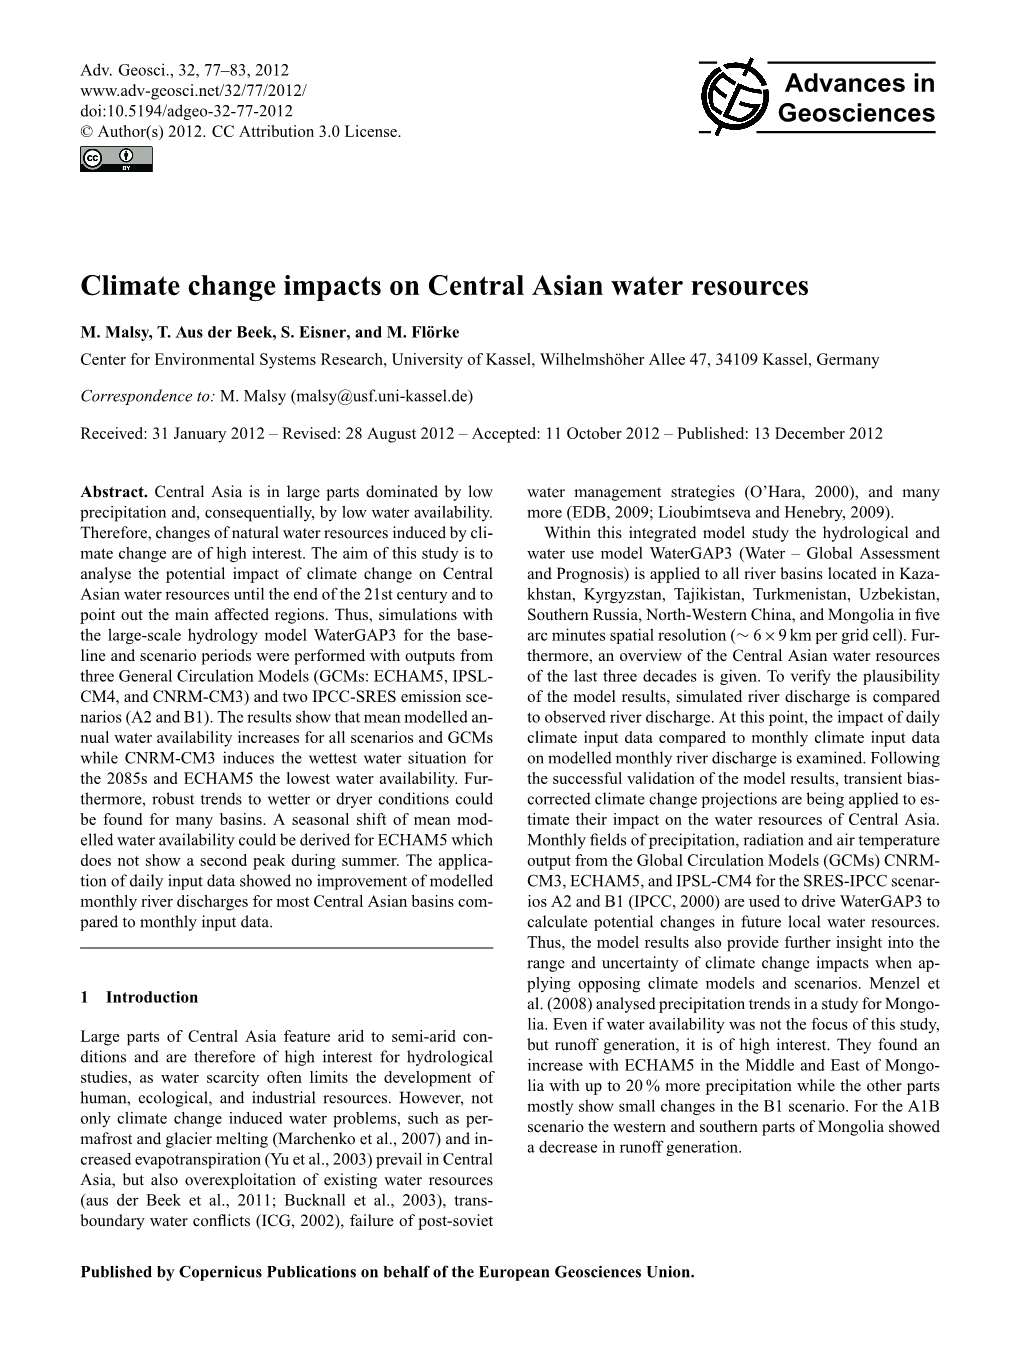 Climate Change Impacts on Central Asian Water Resources